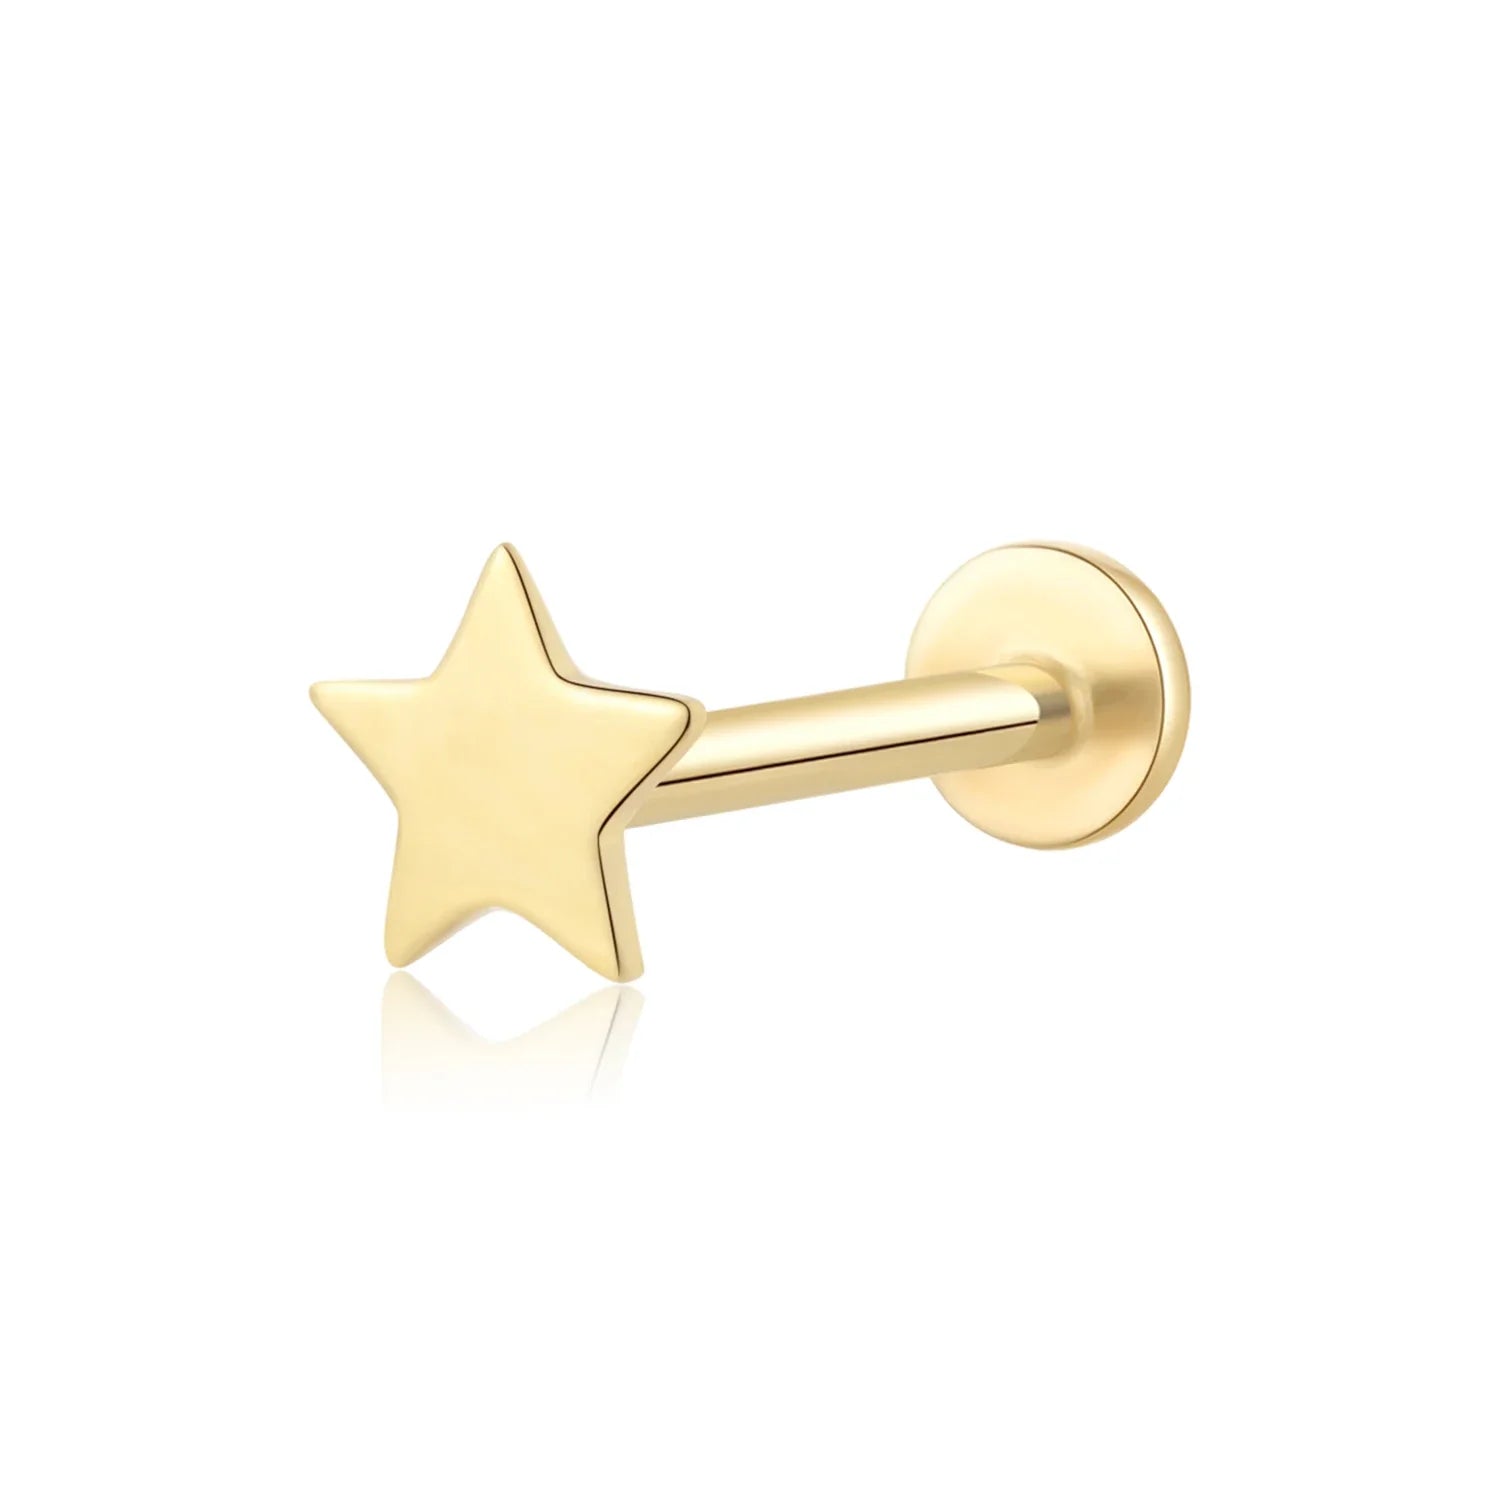 Gold star ear stud star nose stud 14k gold star stud earrings threadless solid gold Ashley Piercing Jewelry